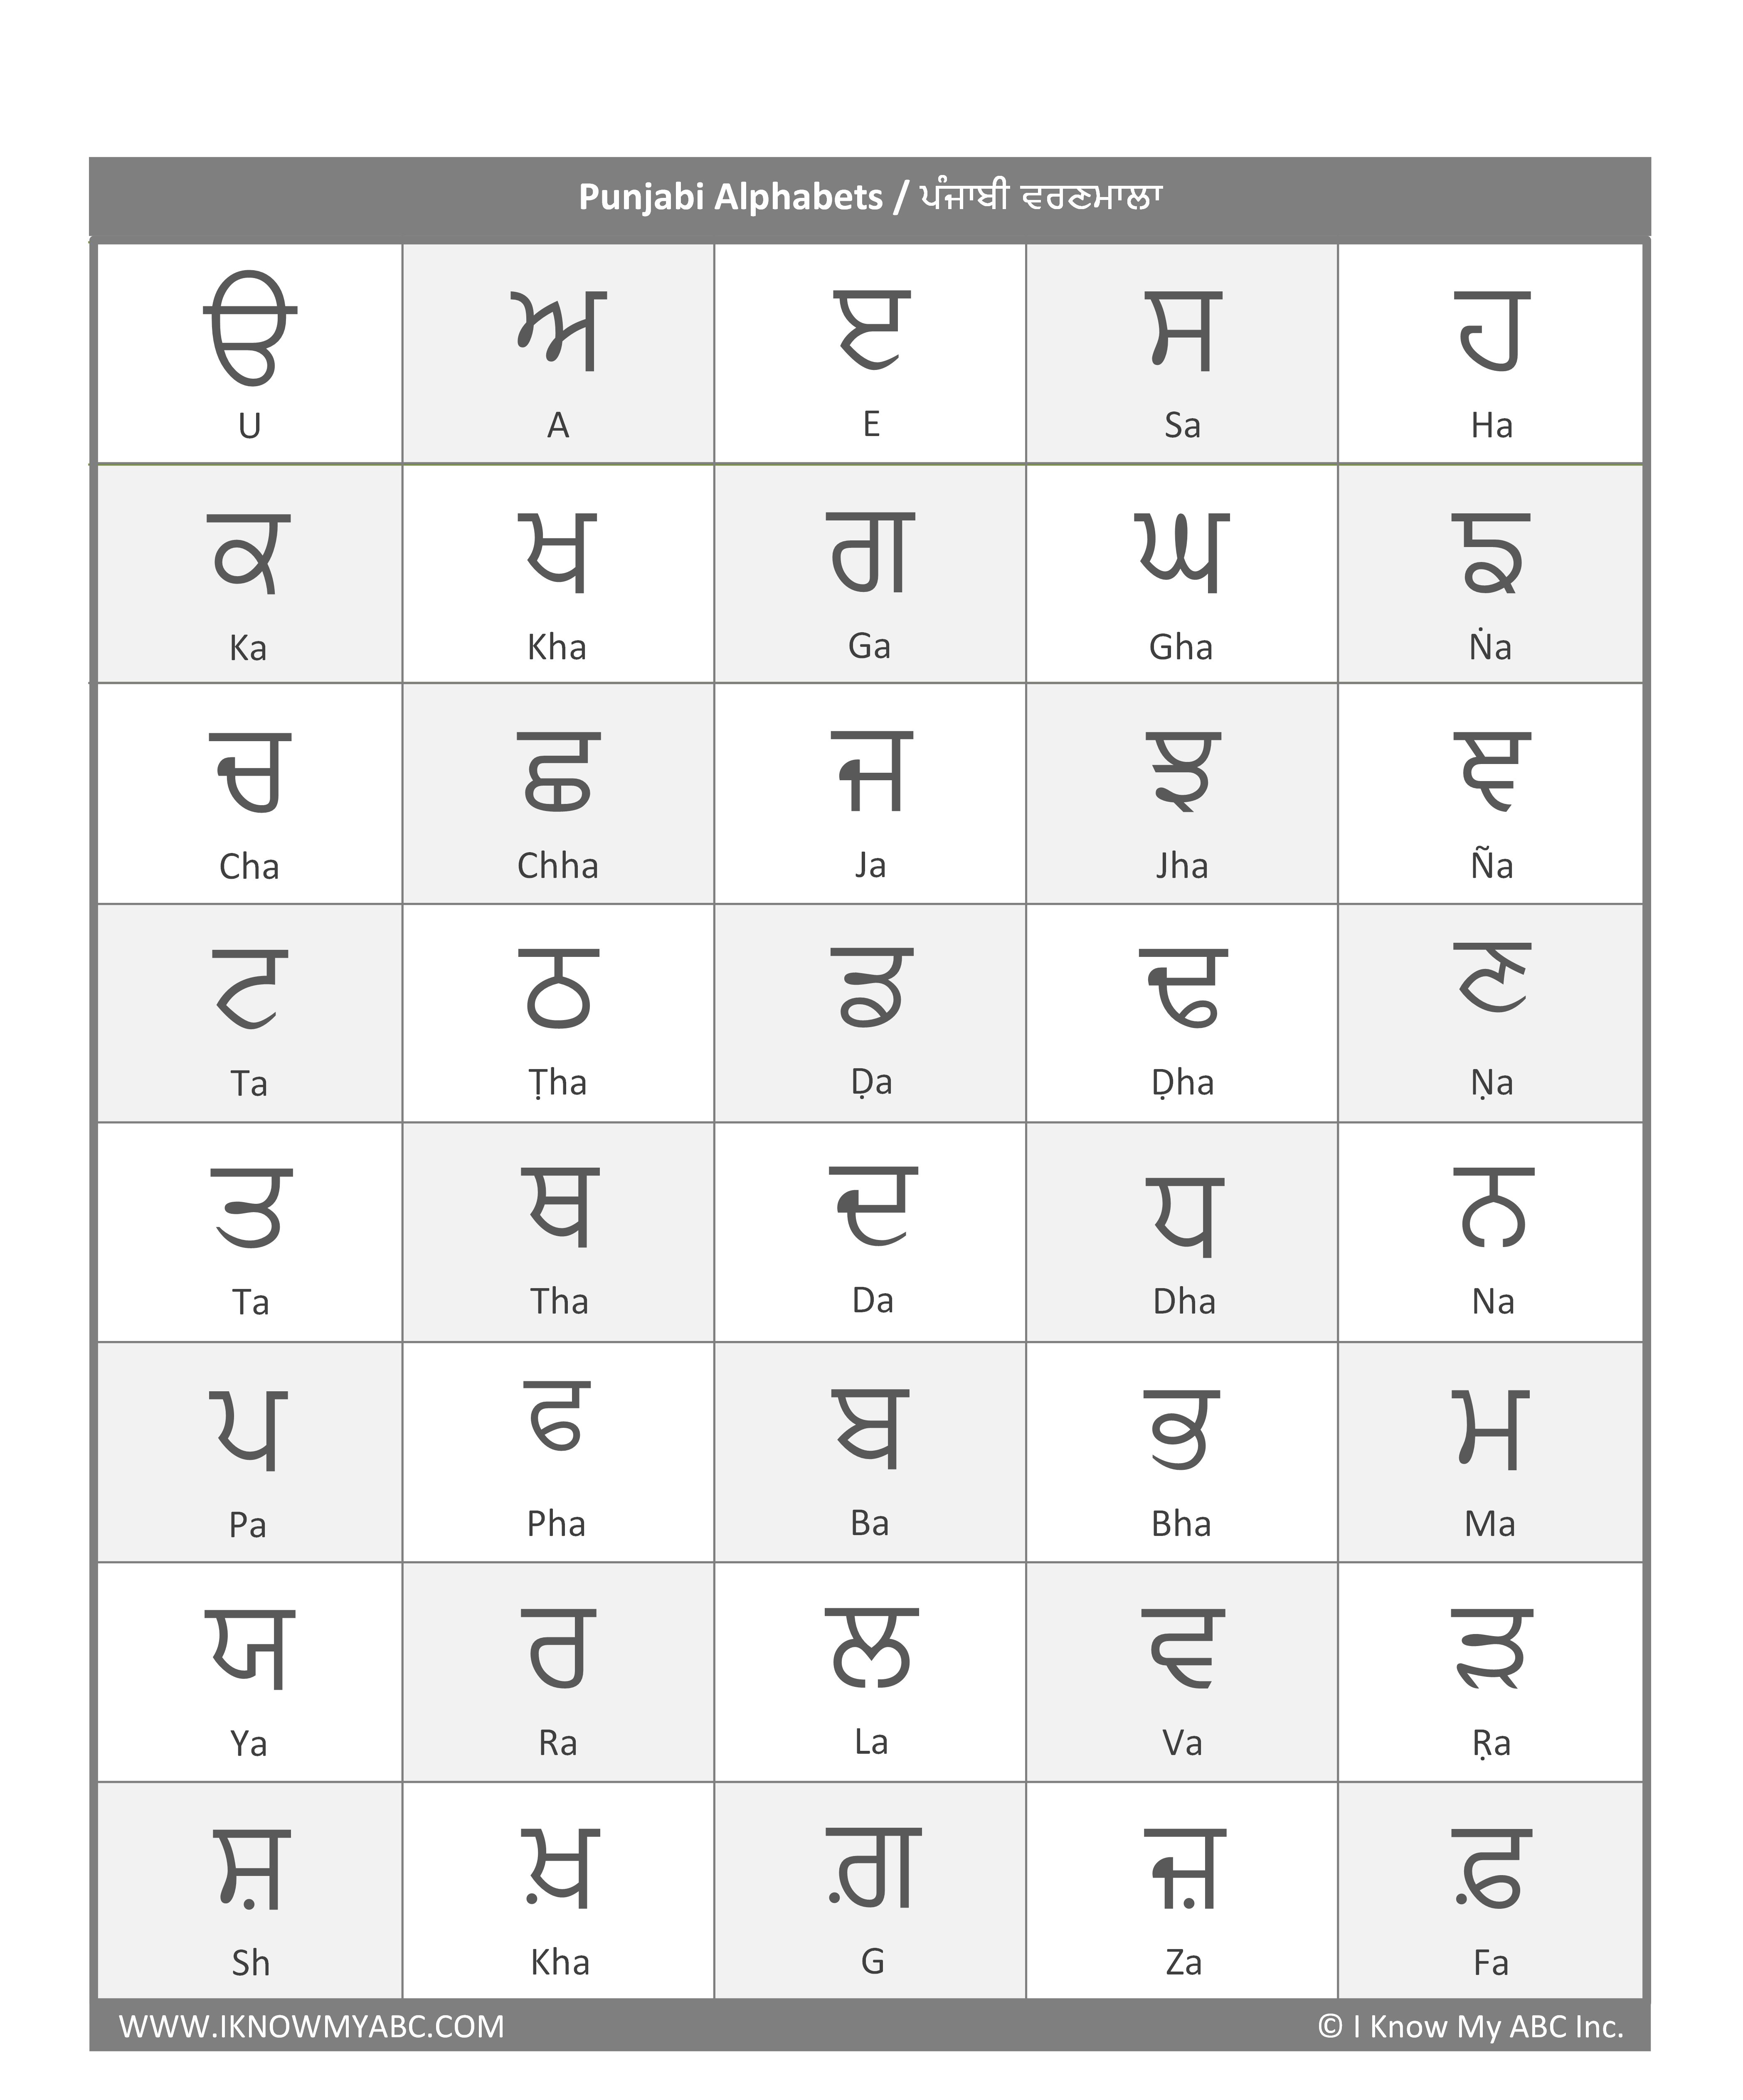 learn-punjabi-alphabets-and-numbers-for-android-apk-download